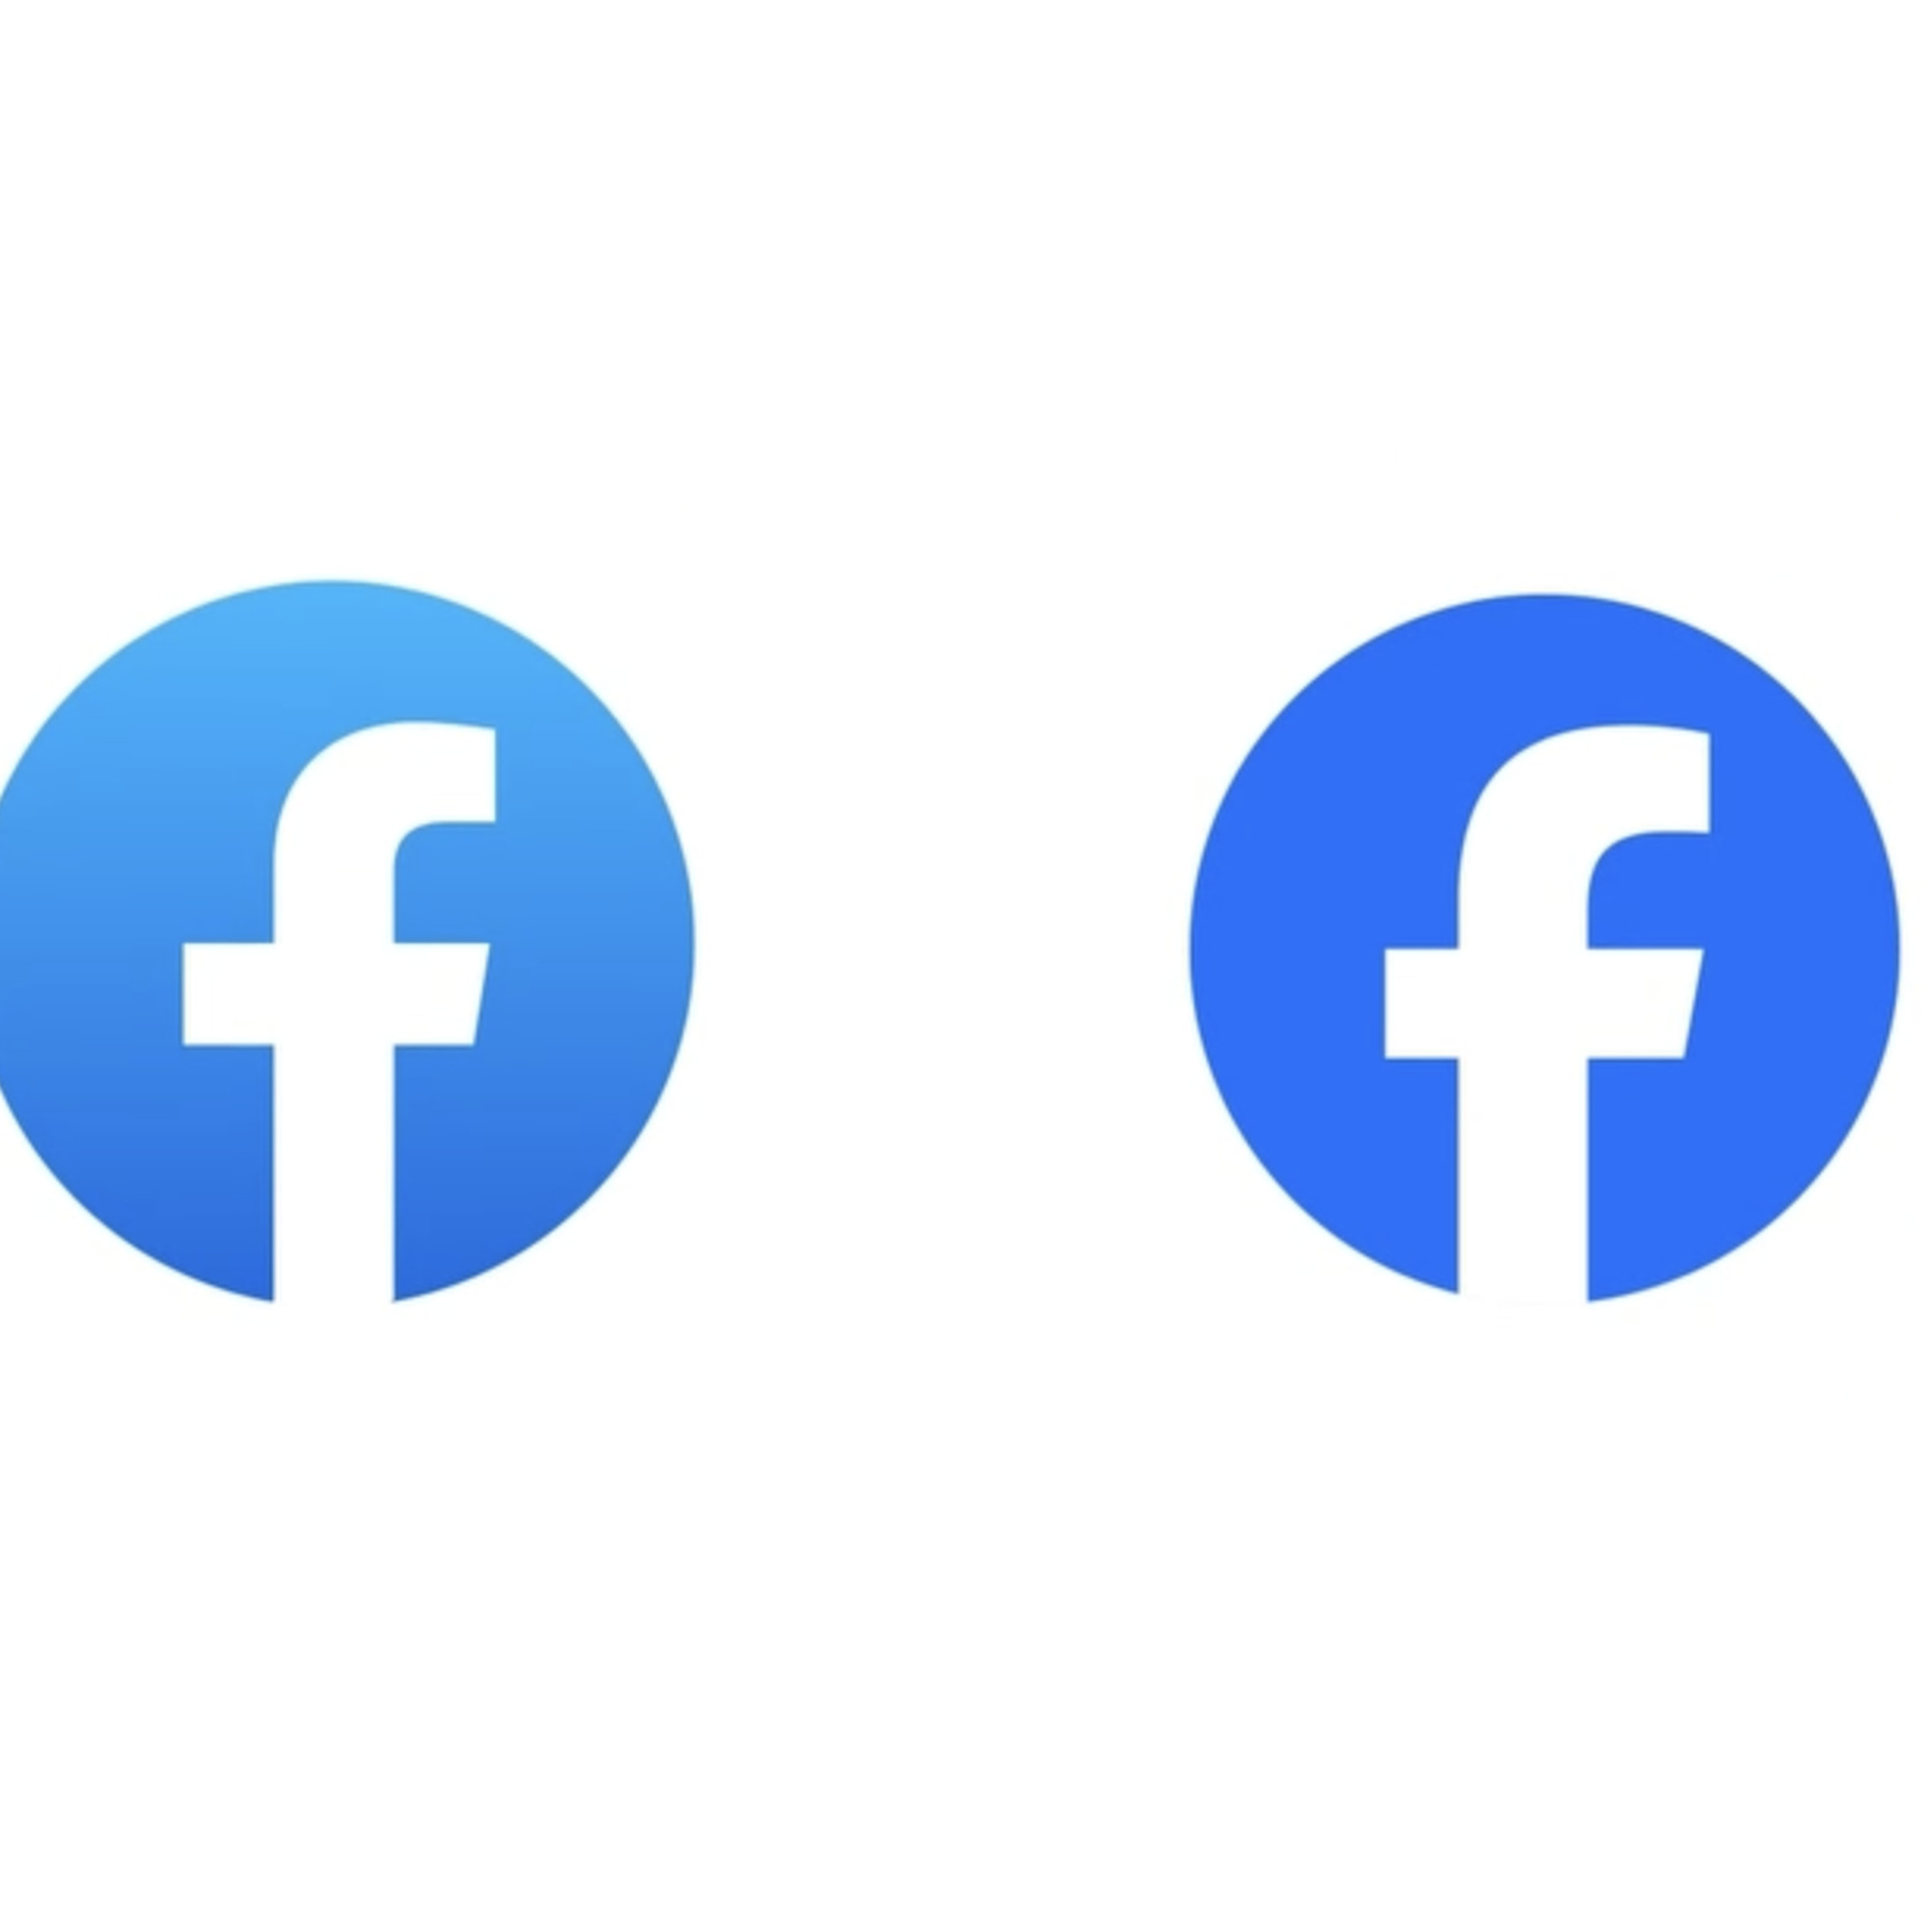 Meta’s two most recent Facebook logos side by side.